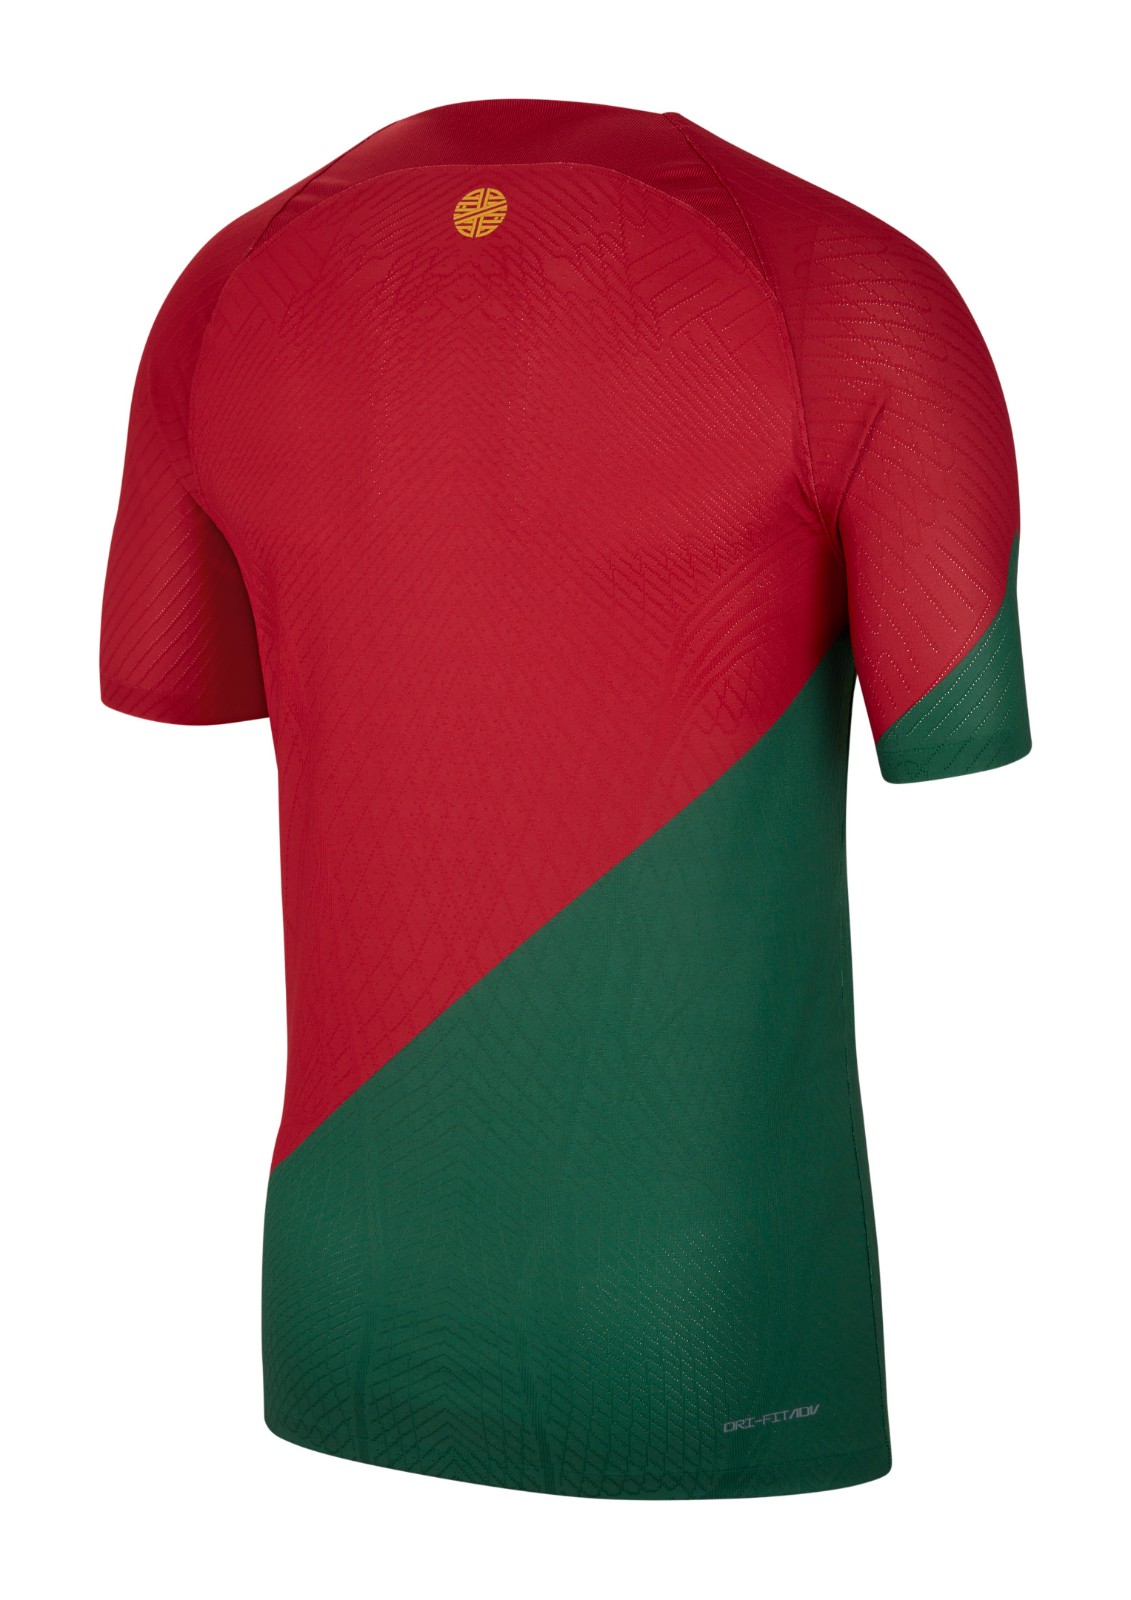 Portugal FIFA World Cup 2022 Home Kit Back